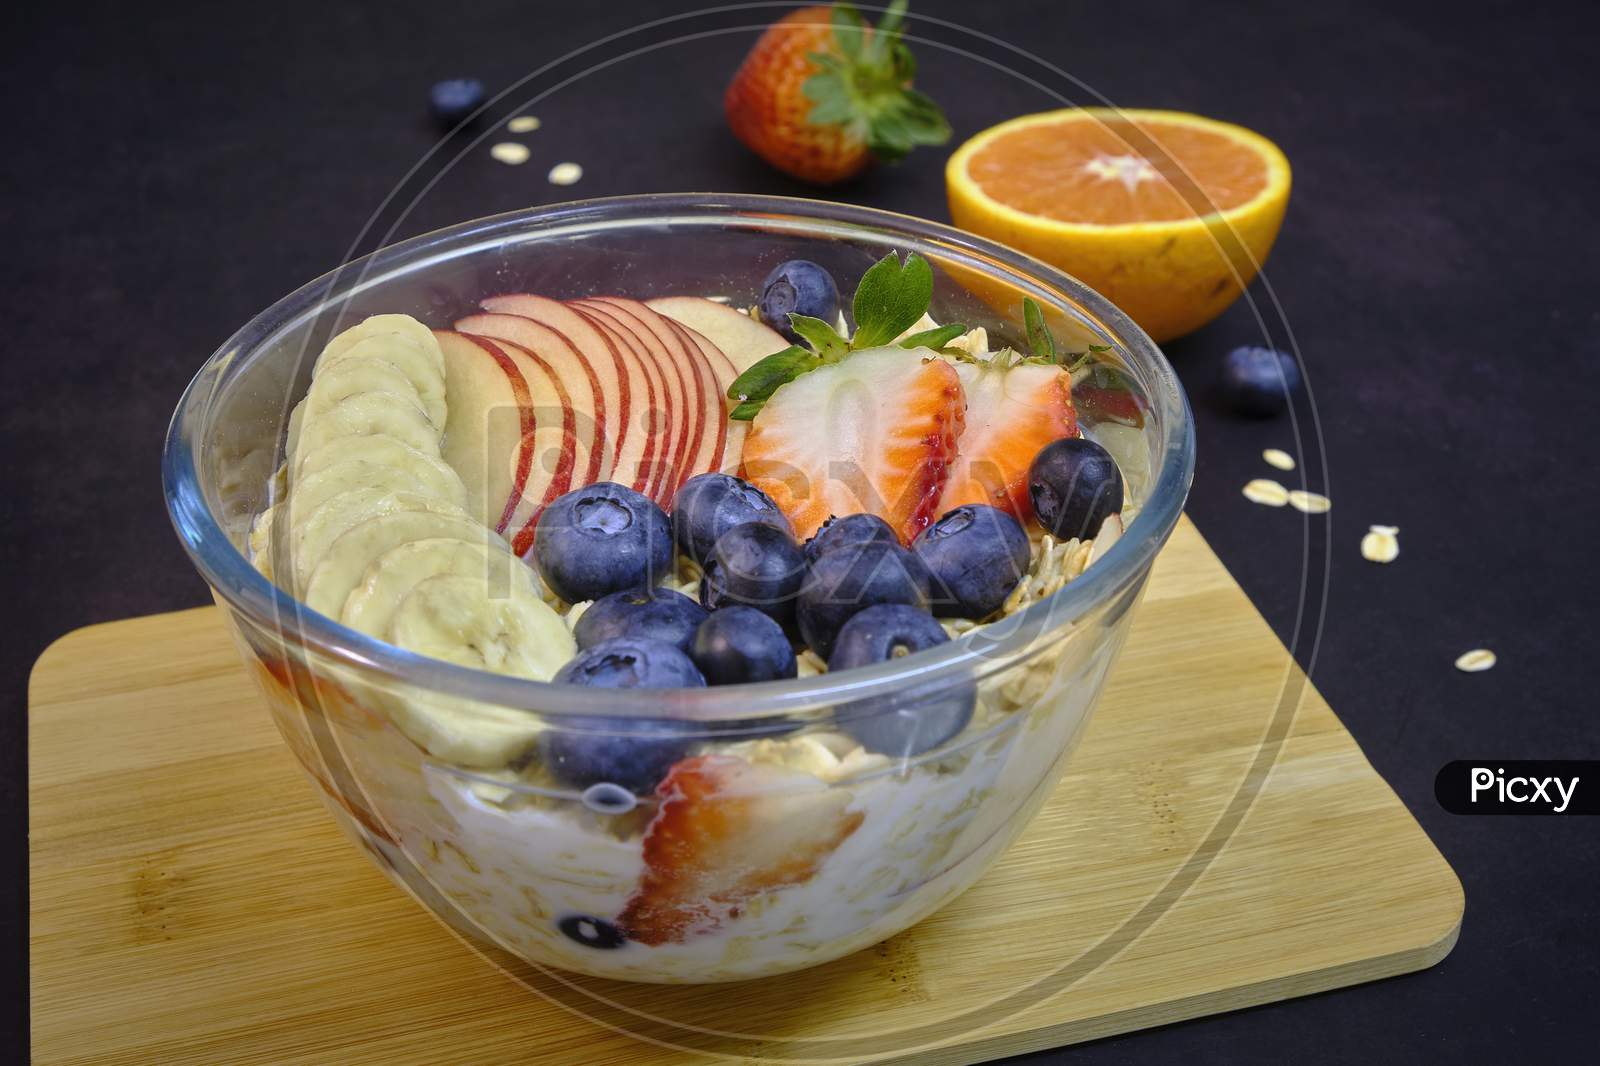 Healthy Breakfast With Fresh Fruits. Bowl Of Colorful Fruits And Oats.